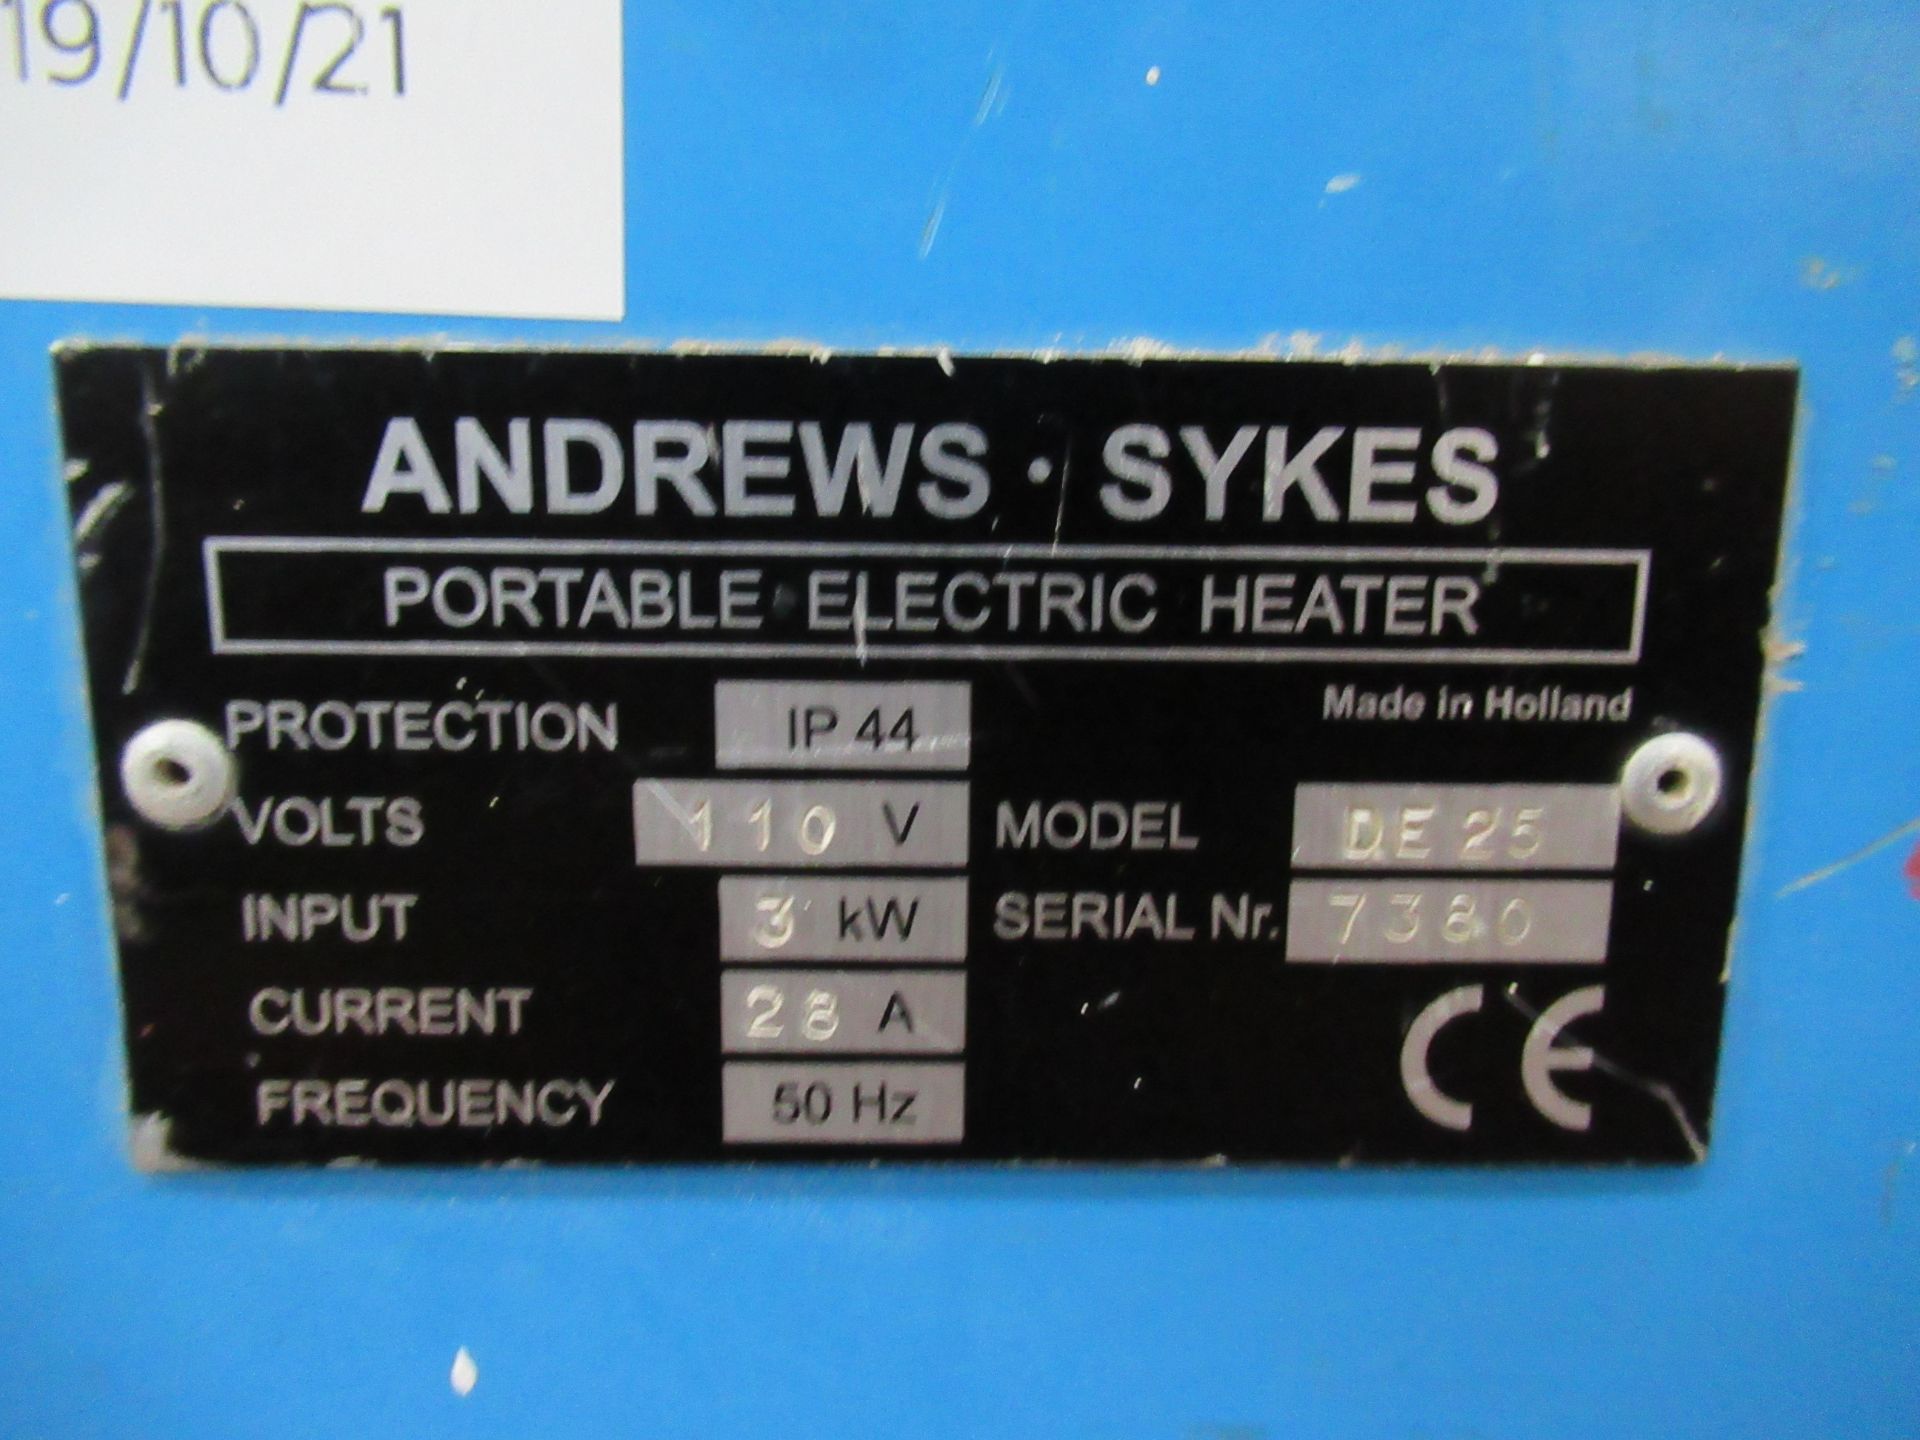 a 110v Andrew Sykes portable electric heater - Image 2 of 3